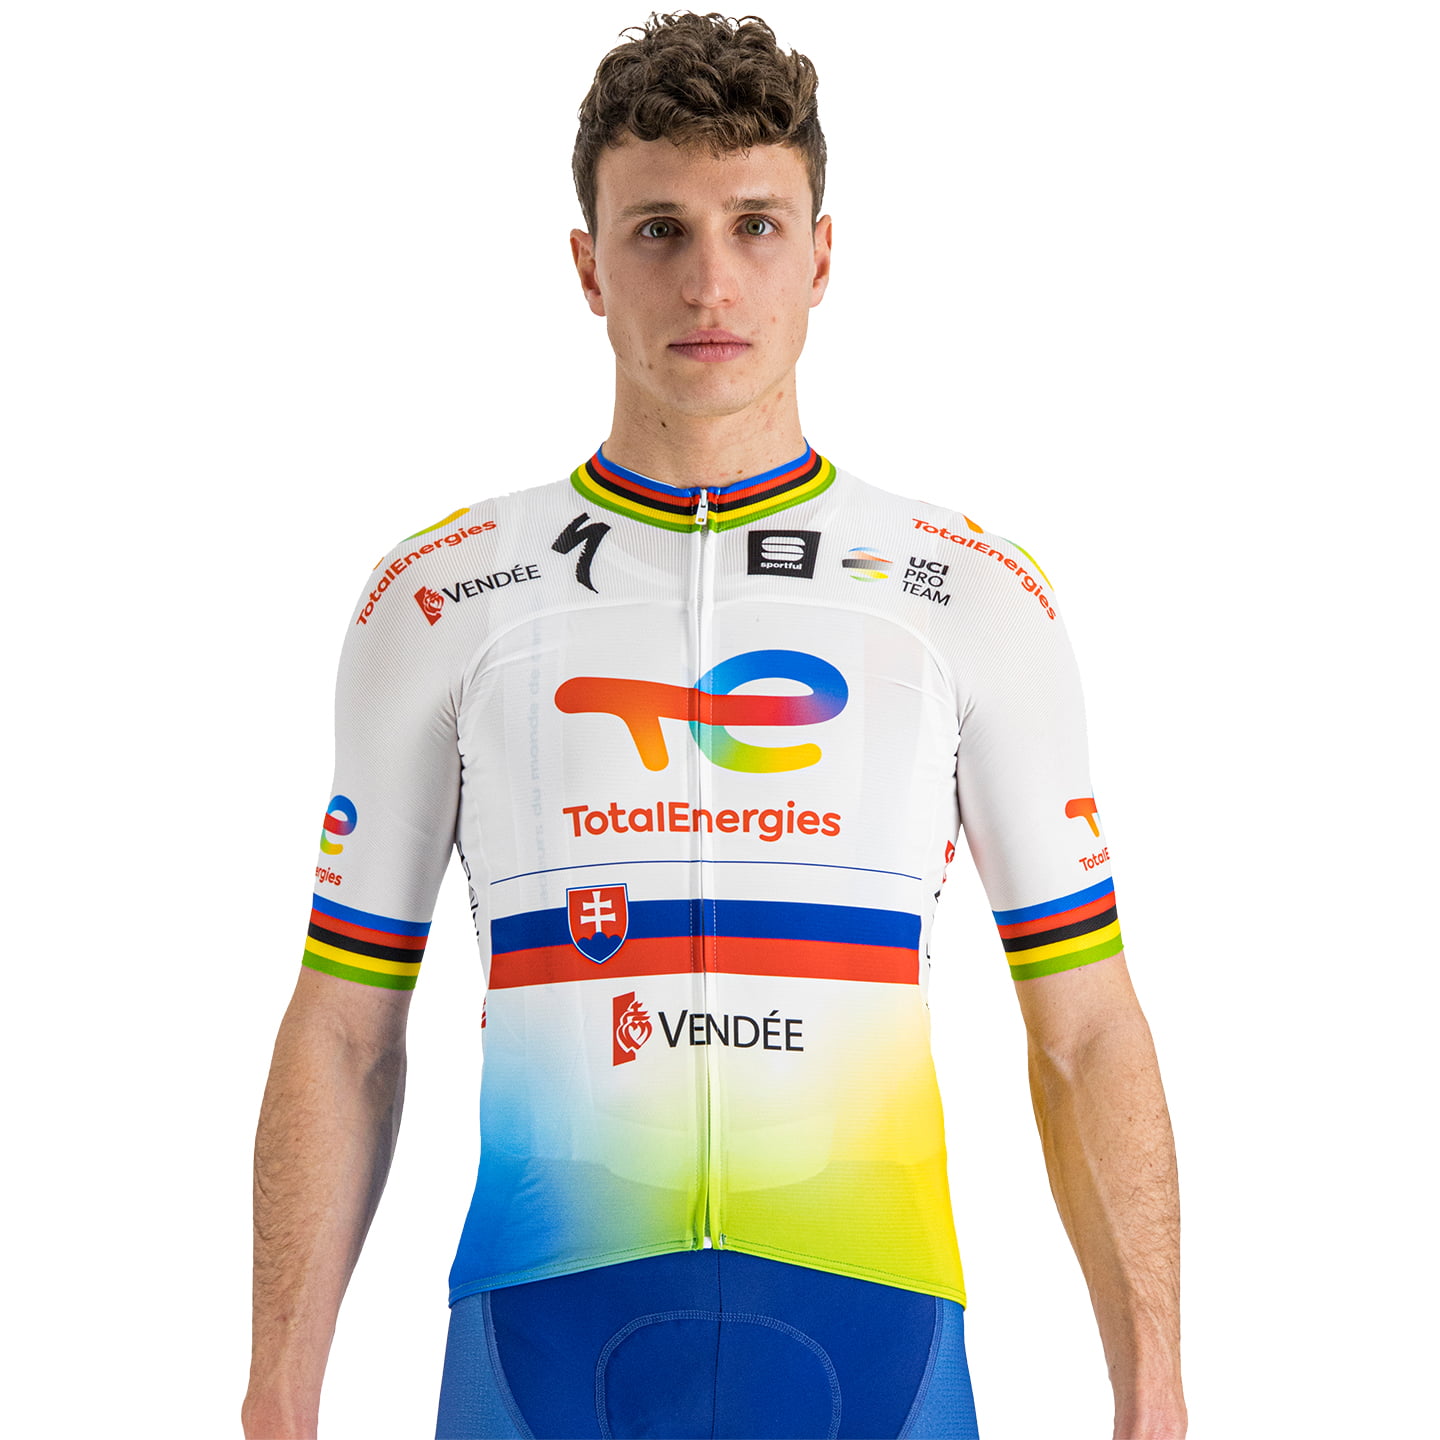 TOTALENERGIES Short Sleeve Ex World Champion 2023 Jersey, for men, size L, Cycling shirt, Cycle clothing